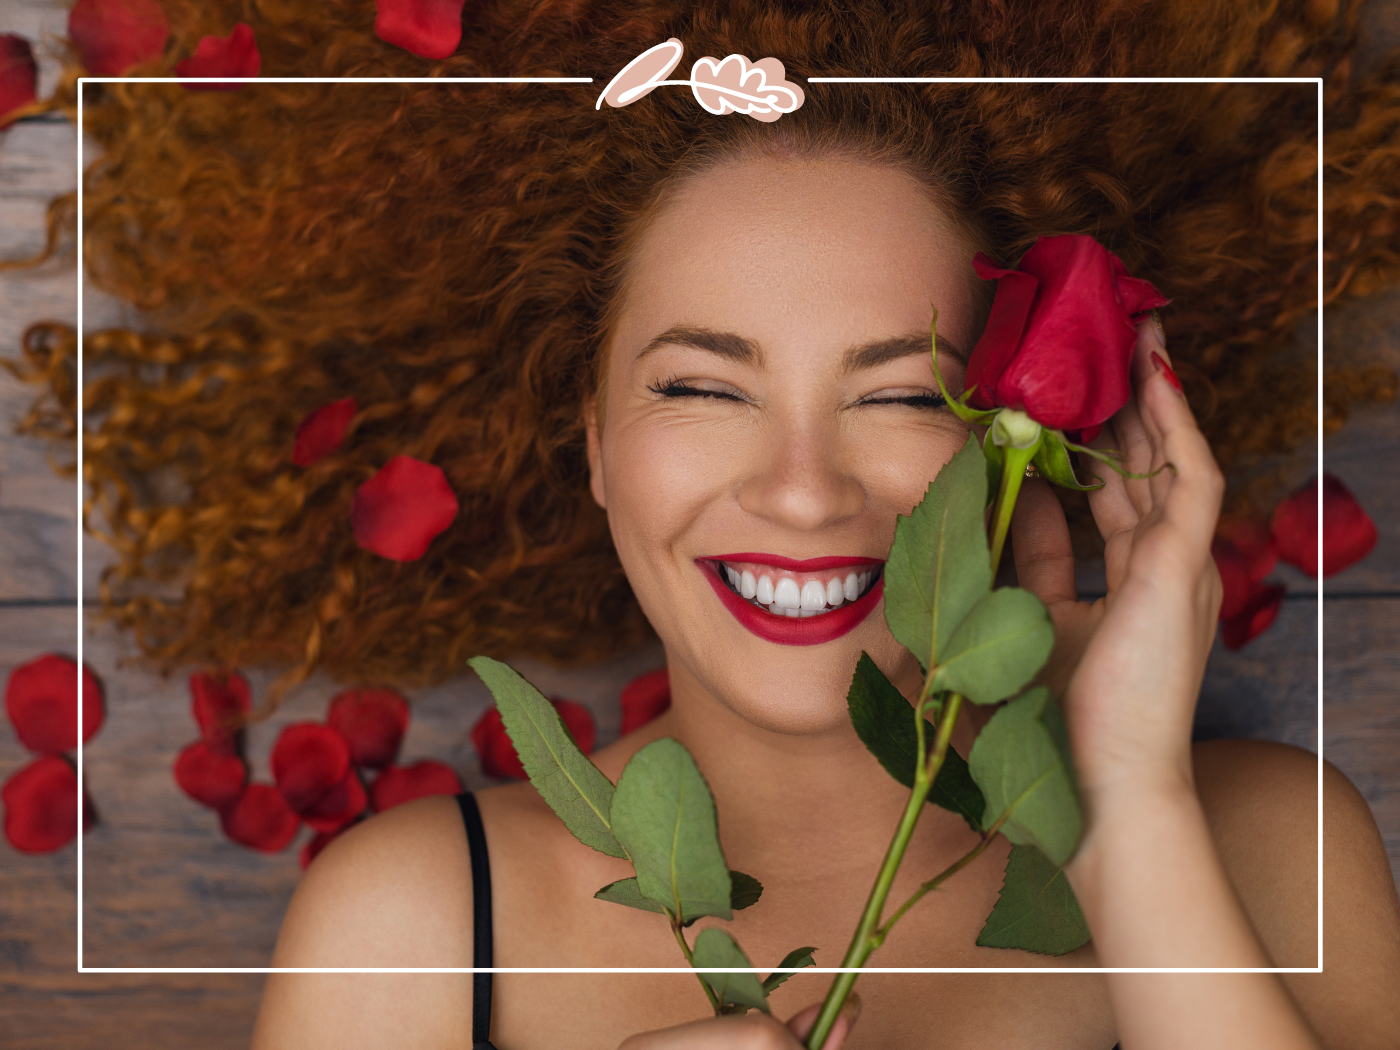 A woman with curly hair smiling joyfully, holding a red rose near her face, surrounded by scattered rose petals on the ground. Fabulous Flowers & Gifts